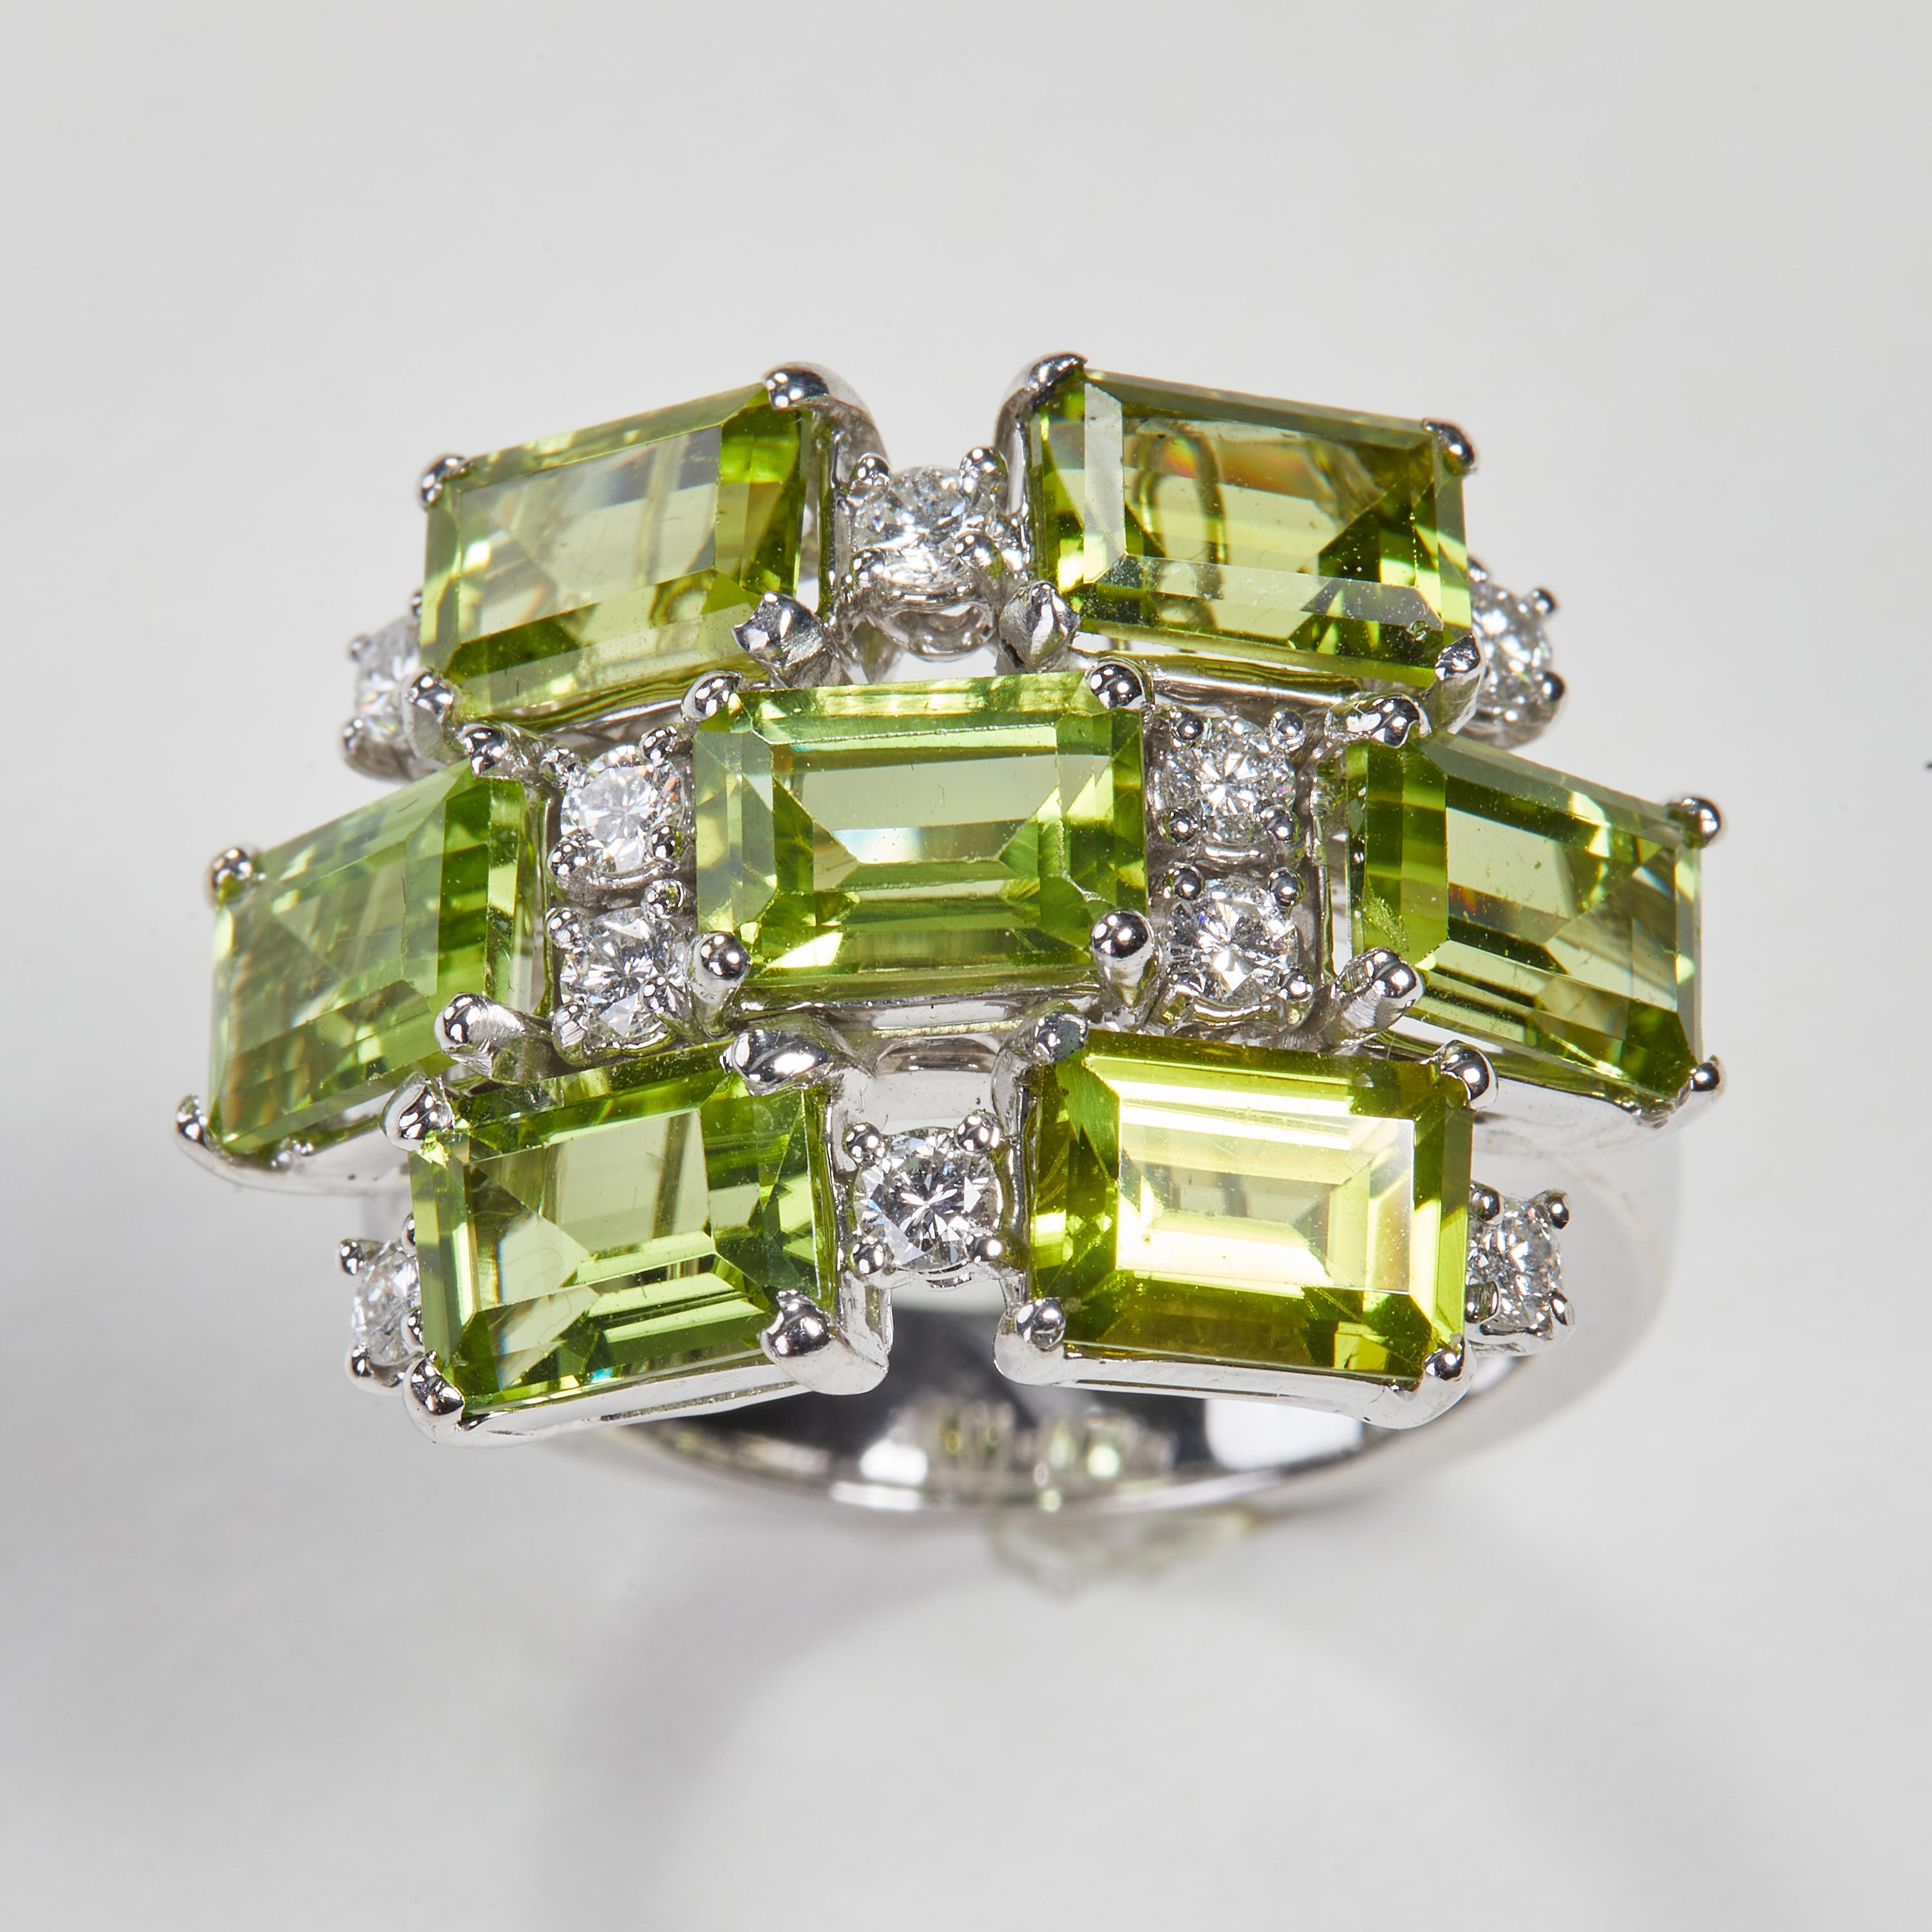 18 Karat White Gold Diamond and Peridot Ring

10 Diamonds 0.46 Carat
7 Peridot  7.55 carat



Size EU 54 US 6.8


Founded in 1974, Gianni Lazzaro is a family-owned jewelery company based out of Düsseldorf, Germany.
Although rooted in Germany, Gianni